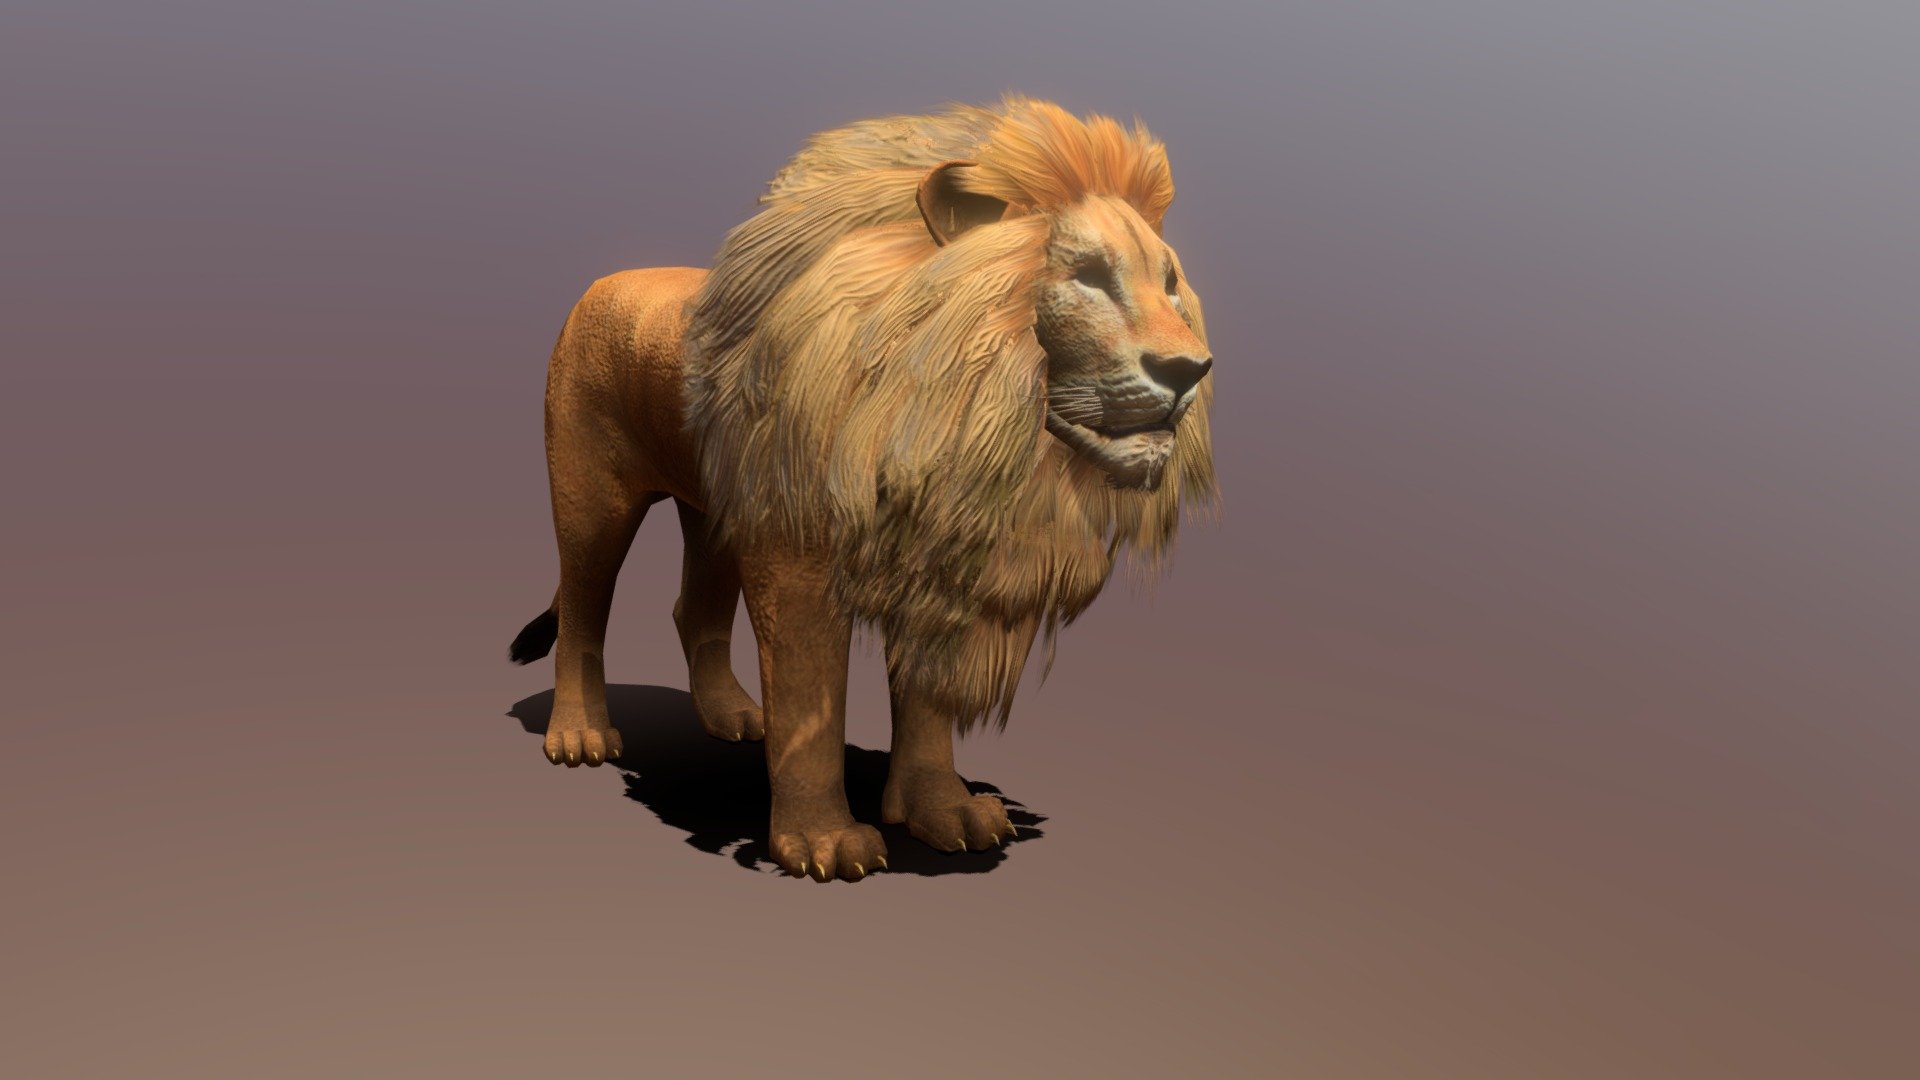 Realistic Male Lion 3D Model:
- Lowpoly (Tris: 5180 - Verts: 3192)
- Game ready with Unity Package, optimized for VR/AR apps
- Texture Maps includes: Basecolor, Opacity, Basecolor with Alpha, Normal, Roughness
- Model is created in Maya, other files supported includes: Blender, FBX, Glb/Gltf, Unity 

10 animations:
- 5-64: idle
- 70-99: walk
- 105-124:run
- 130-159: jump
- 165-194: jump and attack
- 200-224: bite
- 230-279: roar
- 285-324: combo claws attack
- 330-349: get hit
- 355-500: death - Lowpoly Male Lion Rigged Animated for VR AR - Buy Royalty Free 3D model by Dzung Dinh (@hugechimera) 3d model